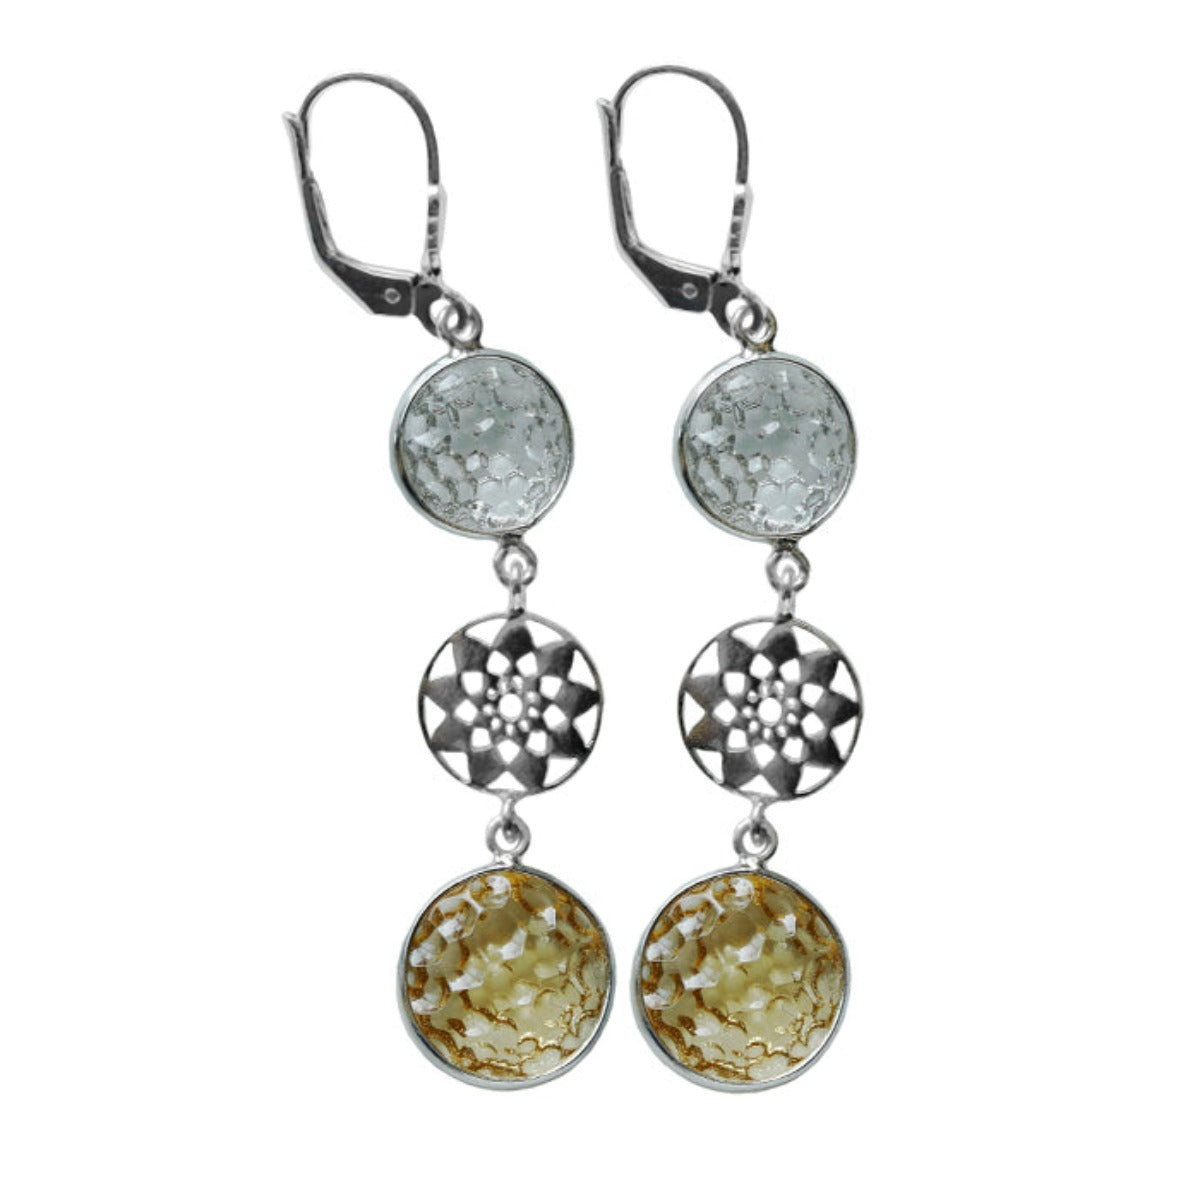 Blisse Allure 925 Sterling Citrine with Topaz Crystal Silver Earrings For Women